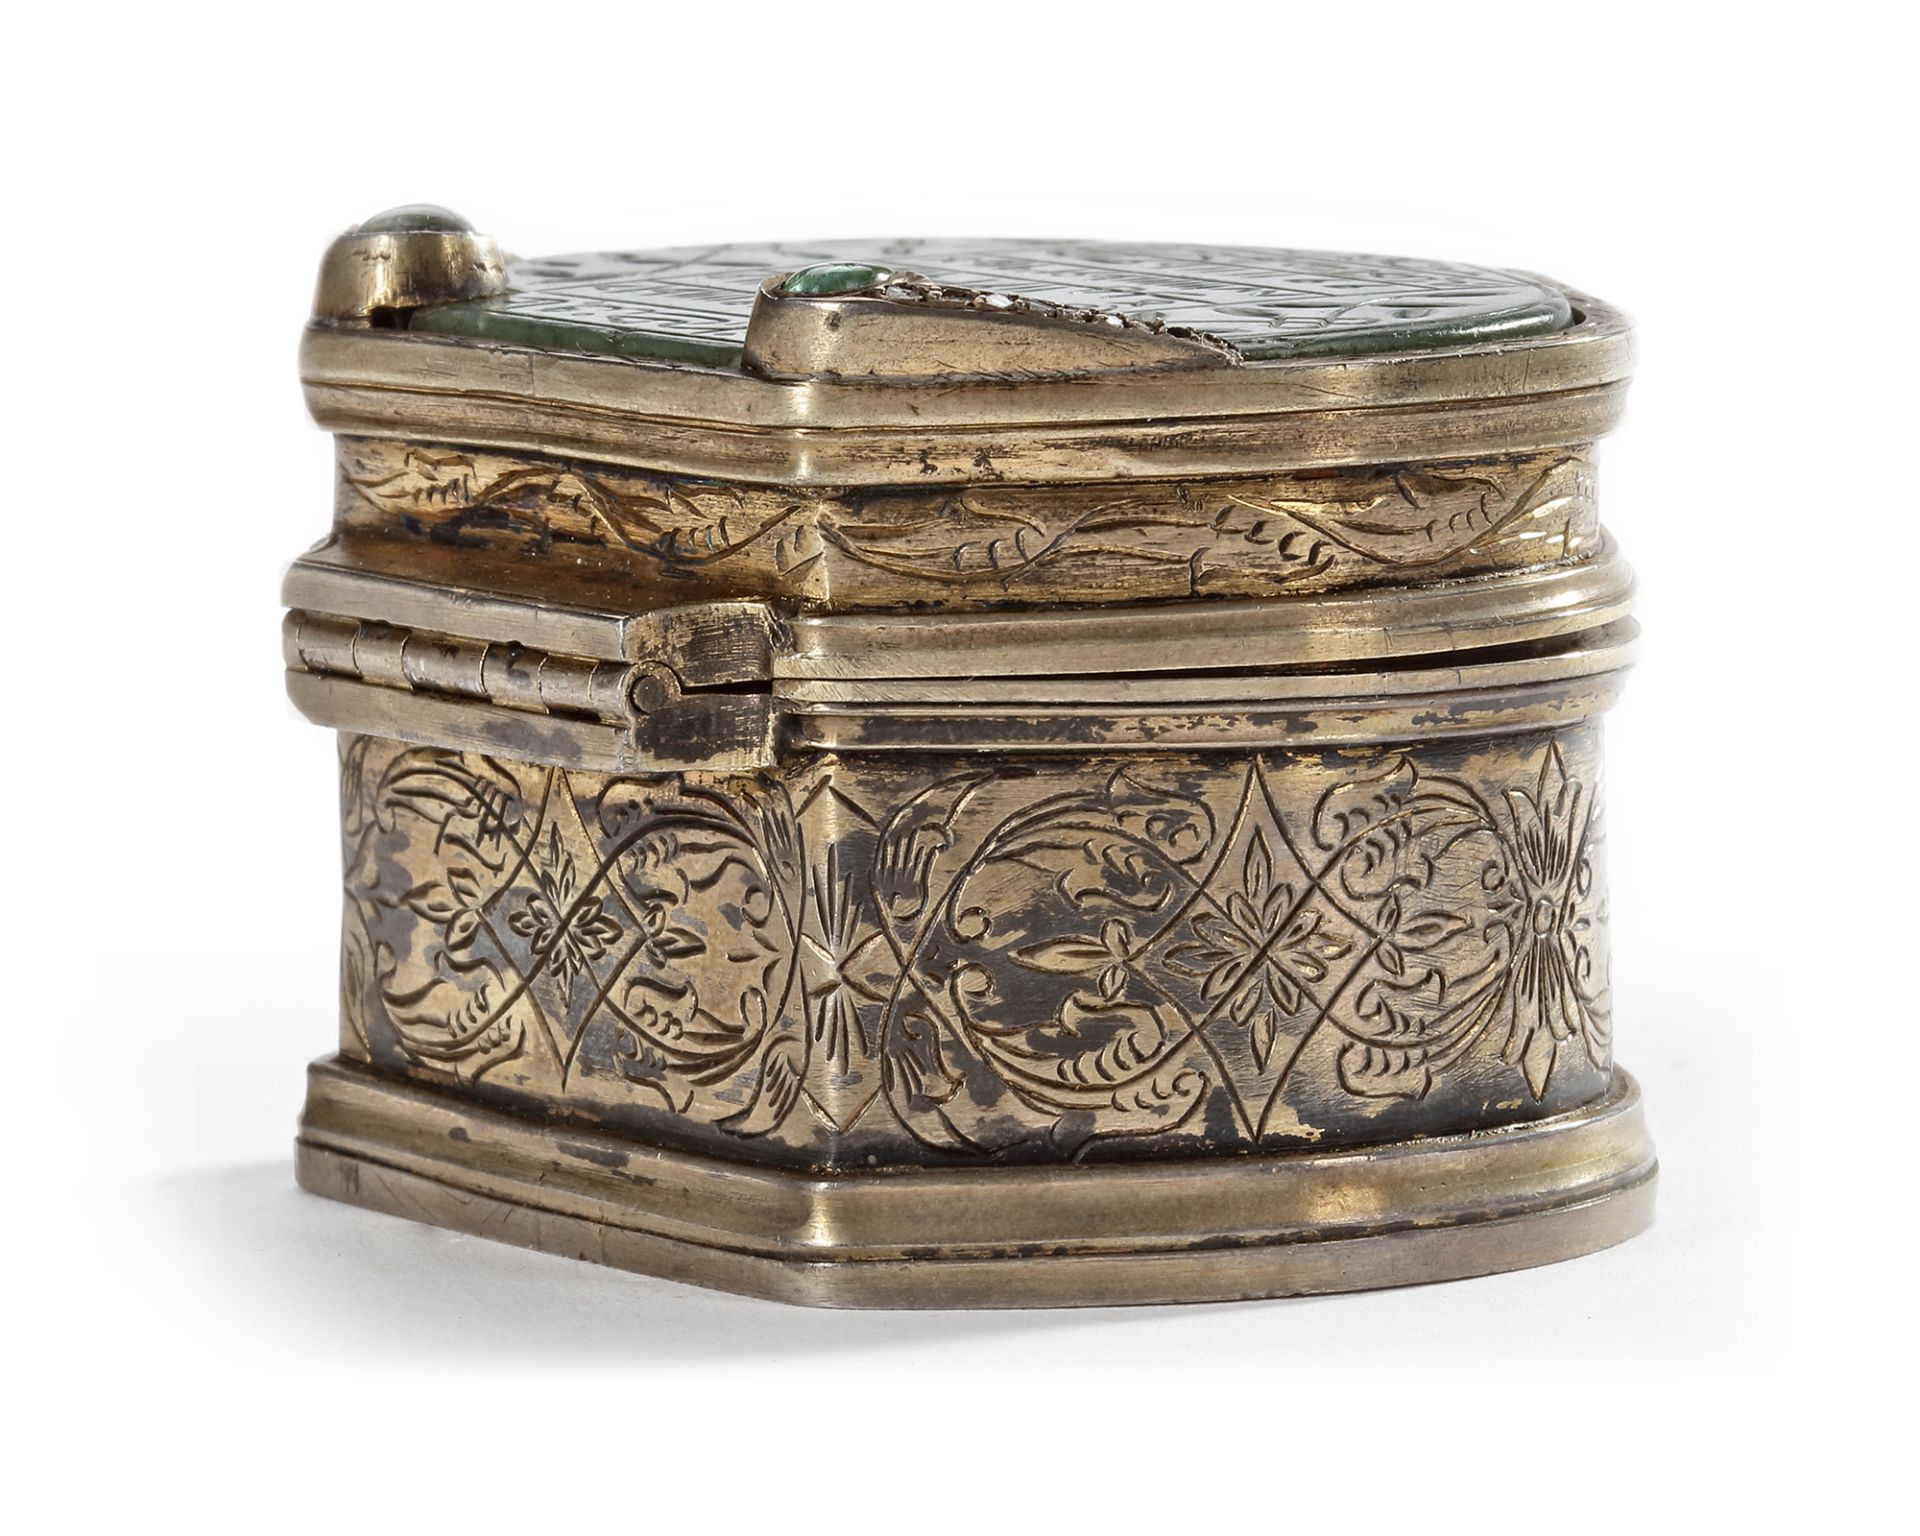 AN OTTOMAN JADE AND GEM-SET SILVER PLATED CASKET, 16TH CENTURY - Image 5 of 12